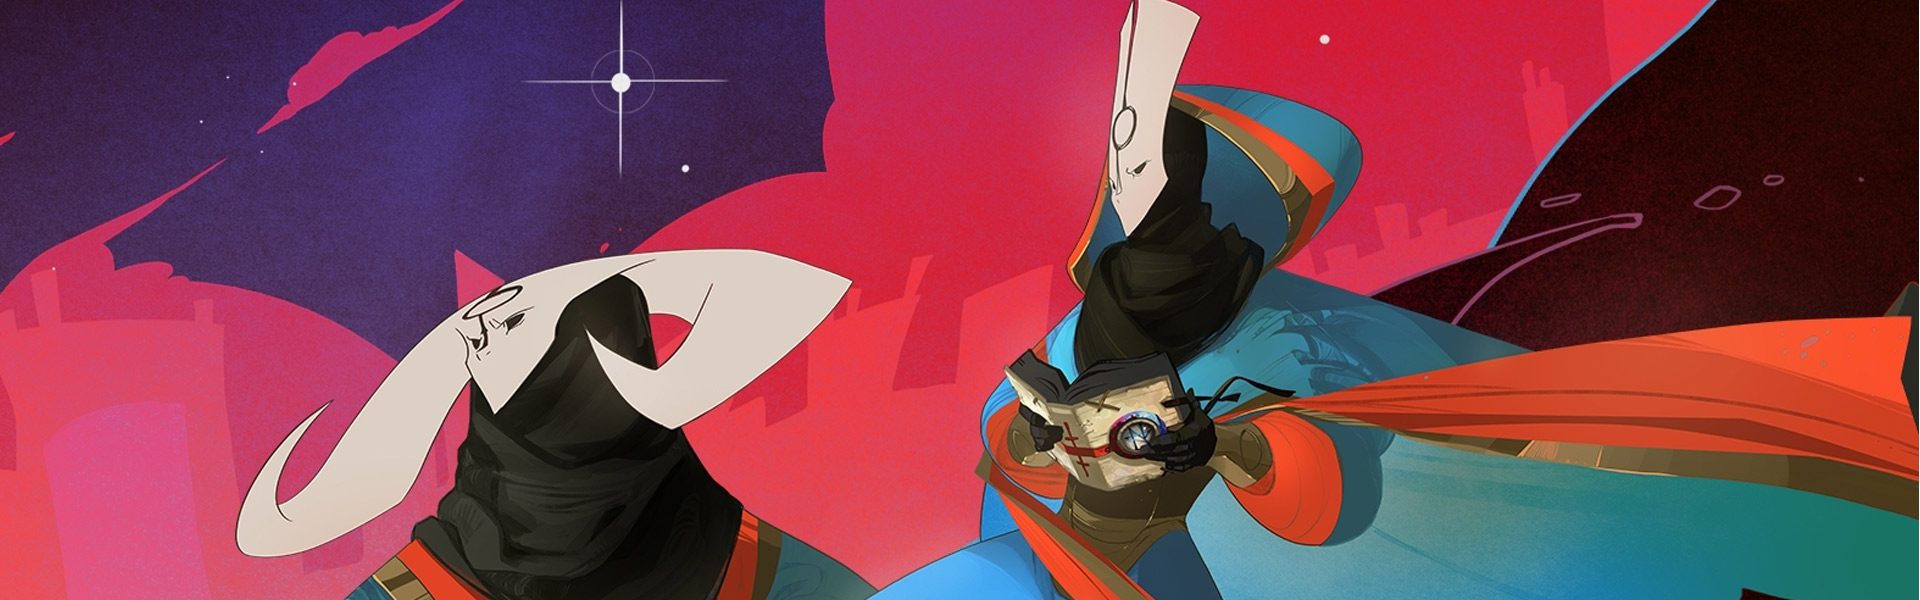 download pyre playstation for free